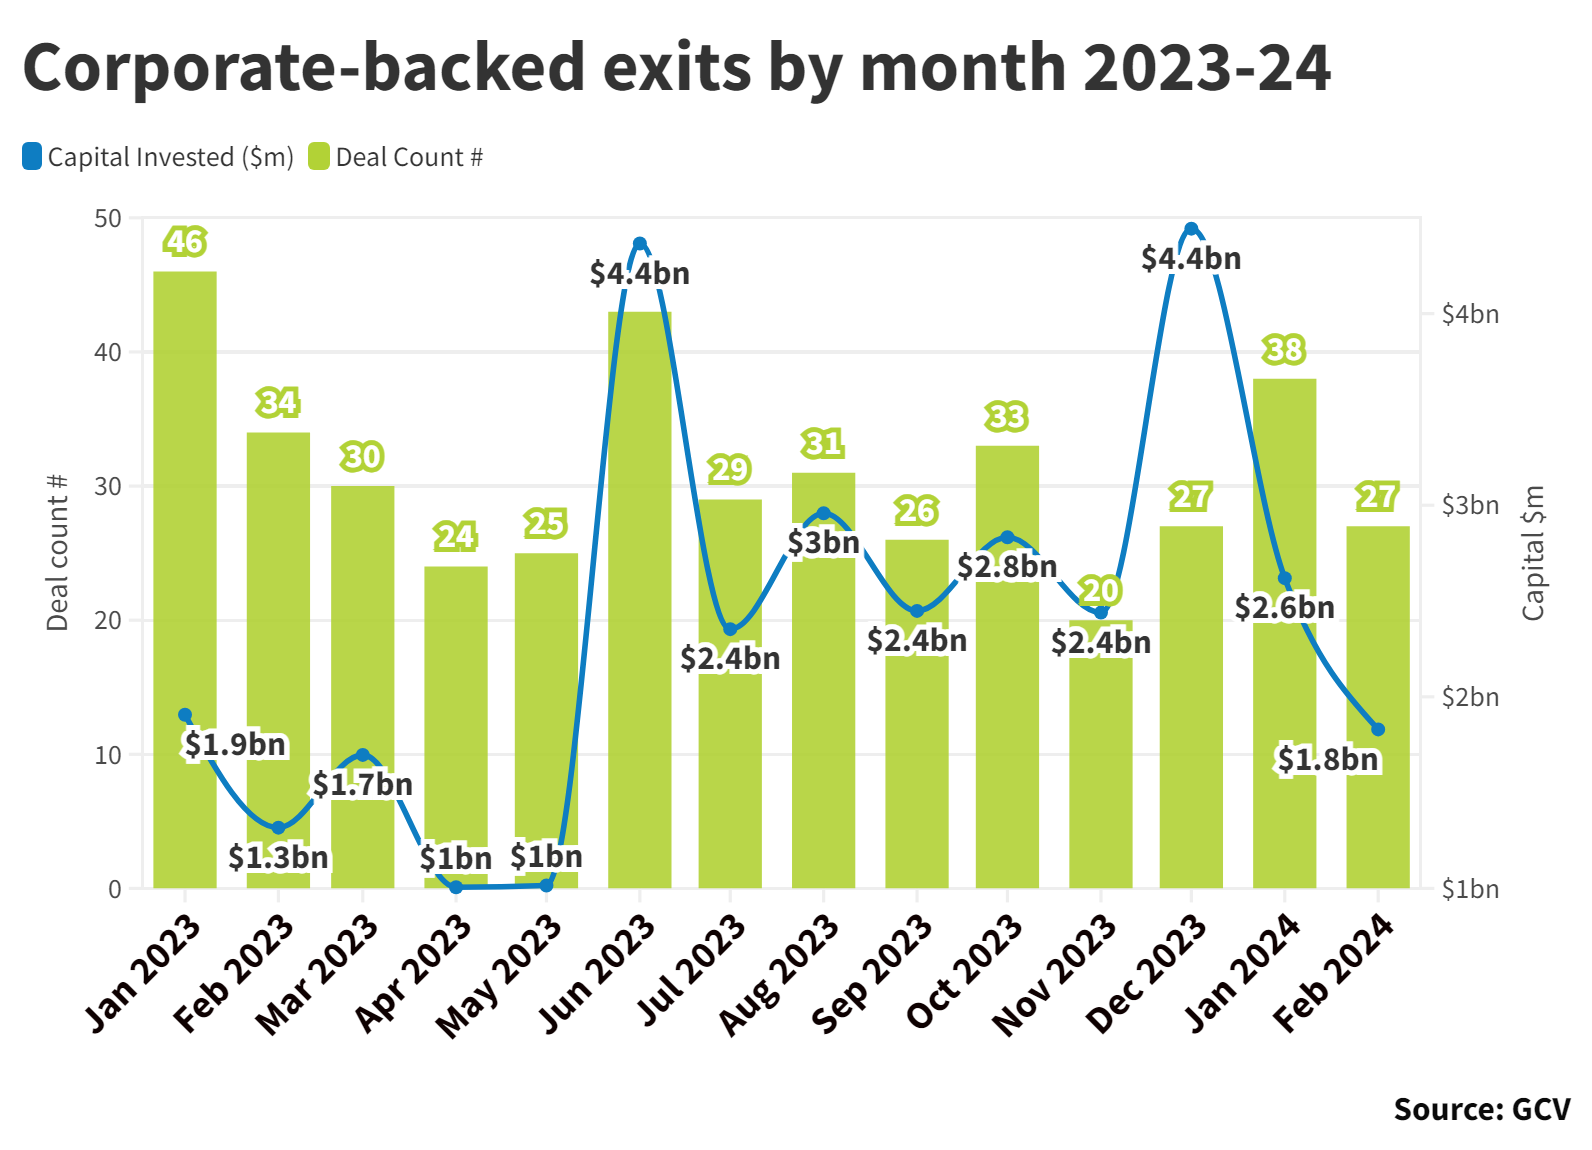 Bar and line chart showing corporate-backed exits by month 2023-24. Source: GCV